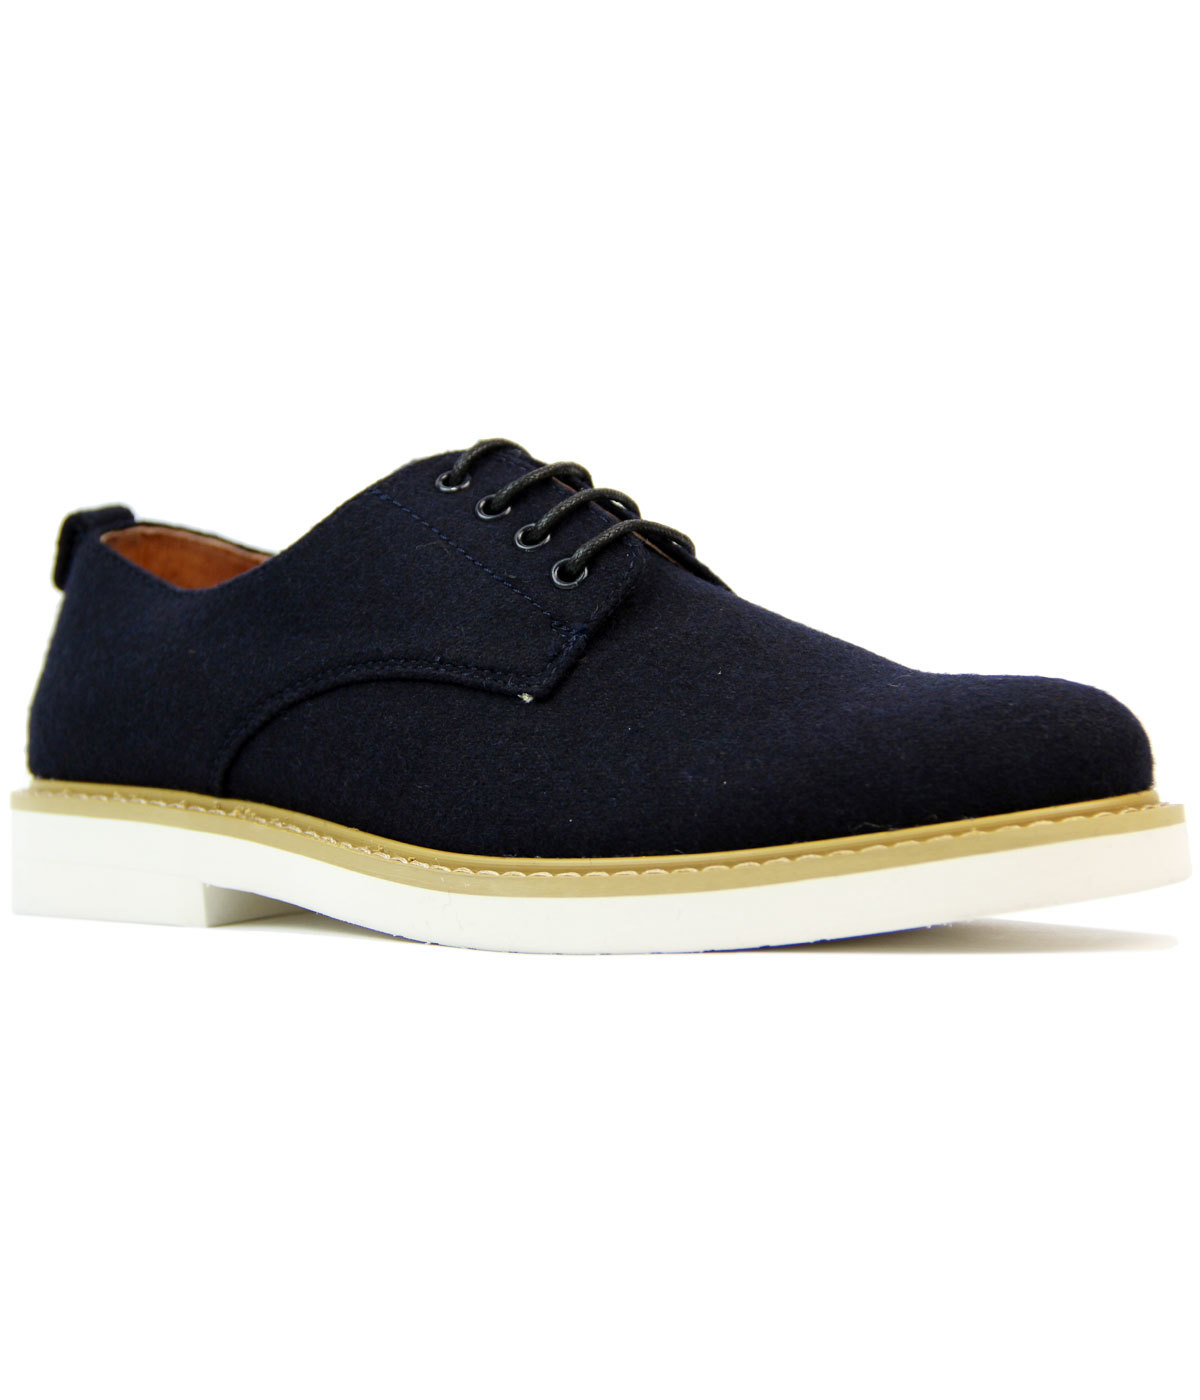 PETER WERTH Pegg Retro 1960s Mod Melton Light Derby Shoes in Navy